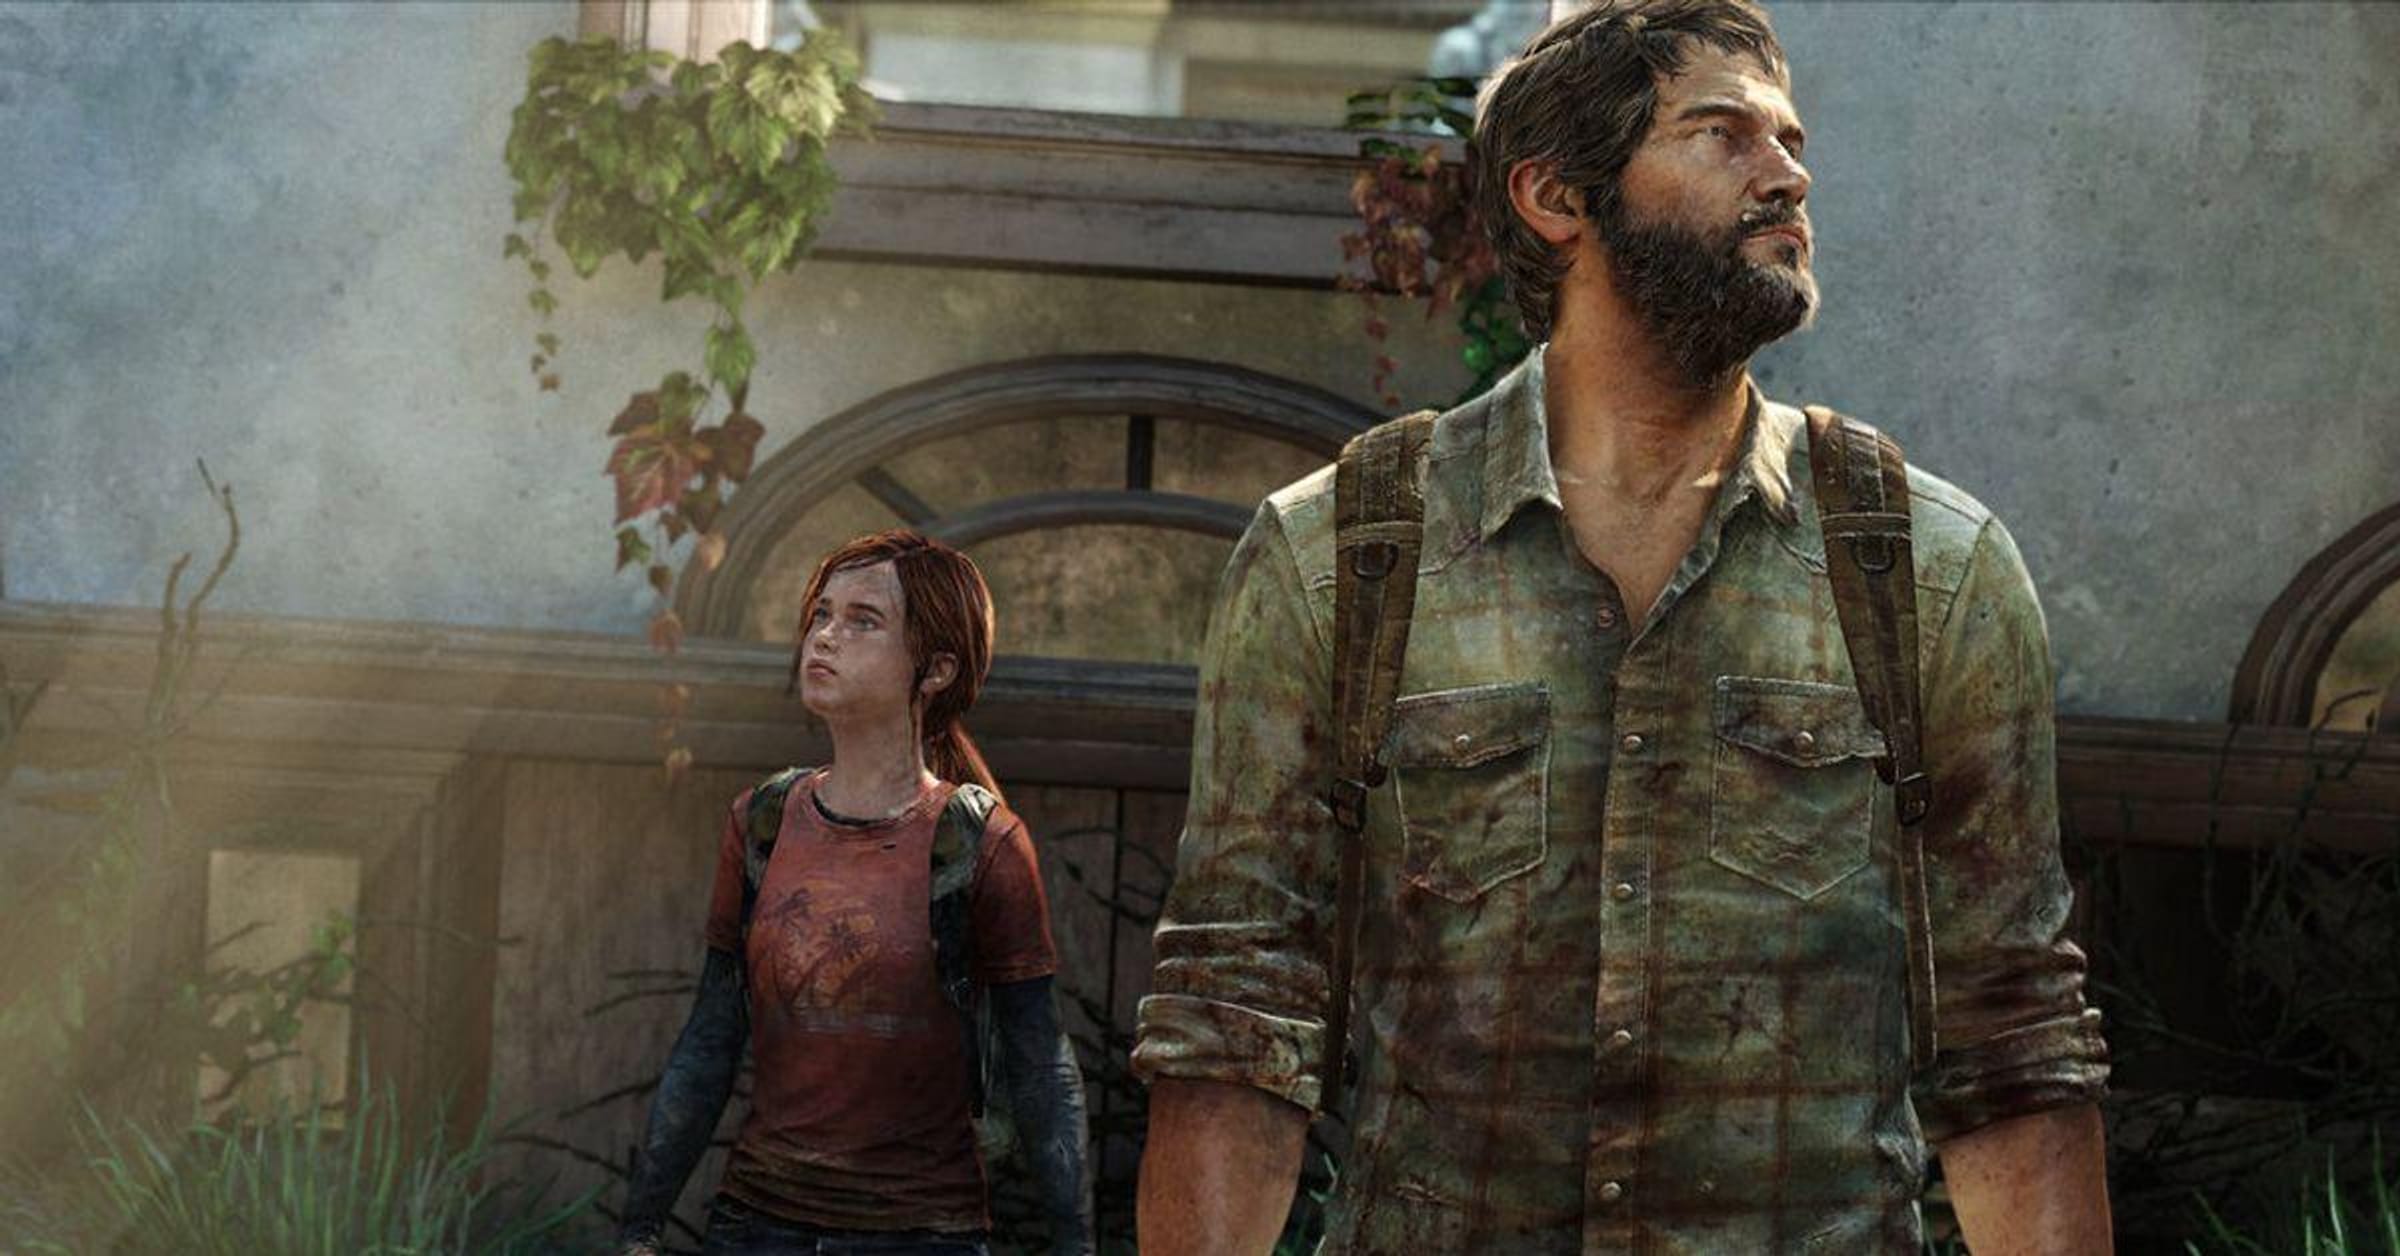 Uncharted 4 is the best game of 2016 - Metacritic